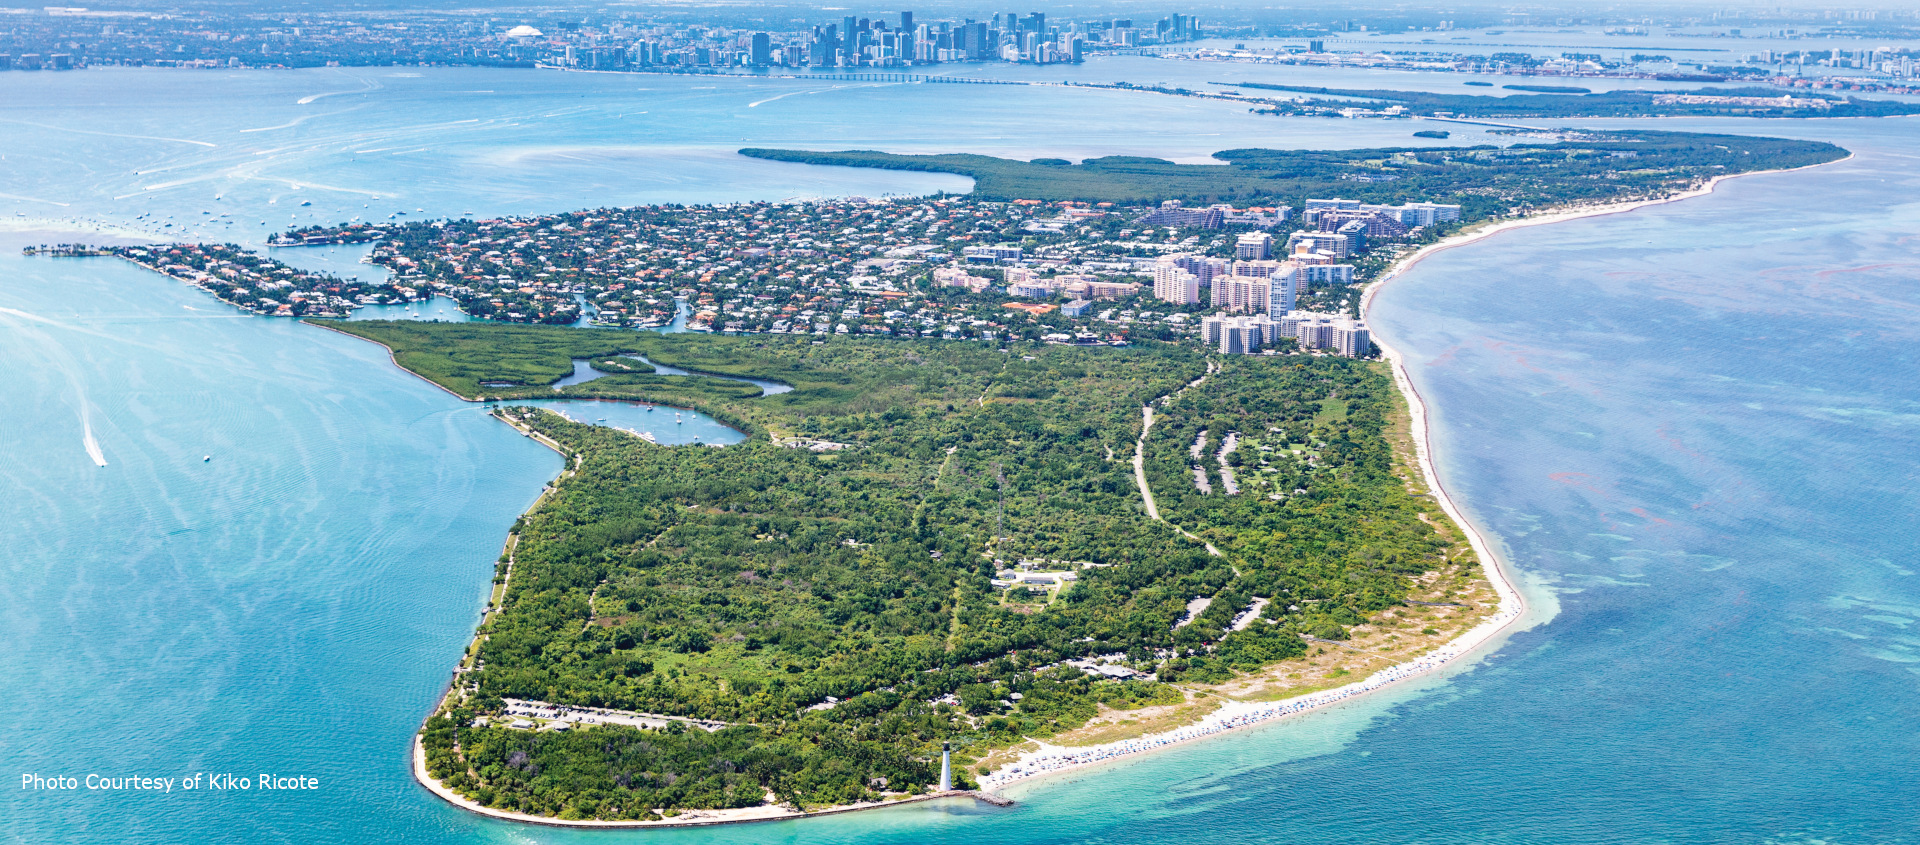 Key Biscayne, Florida - A touch of paradise